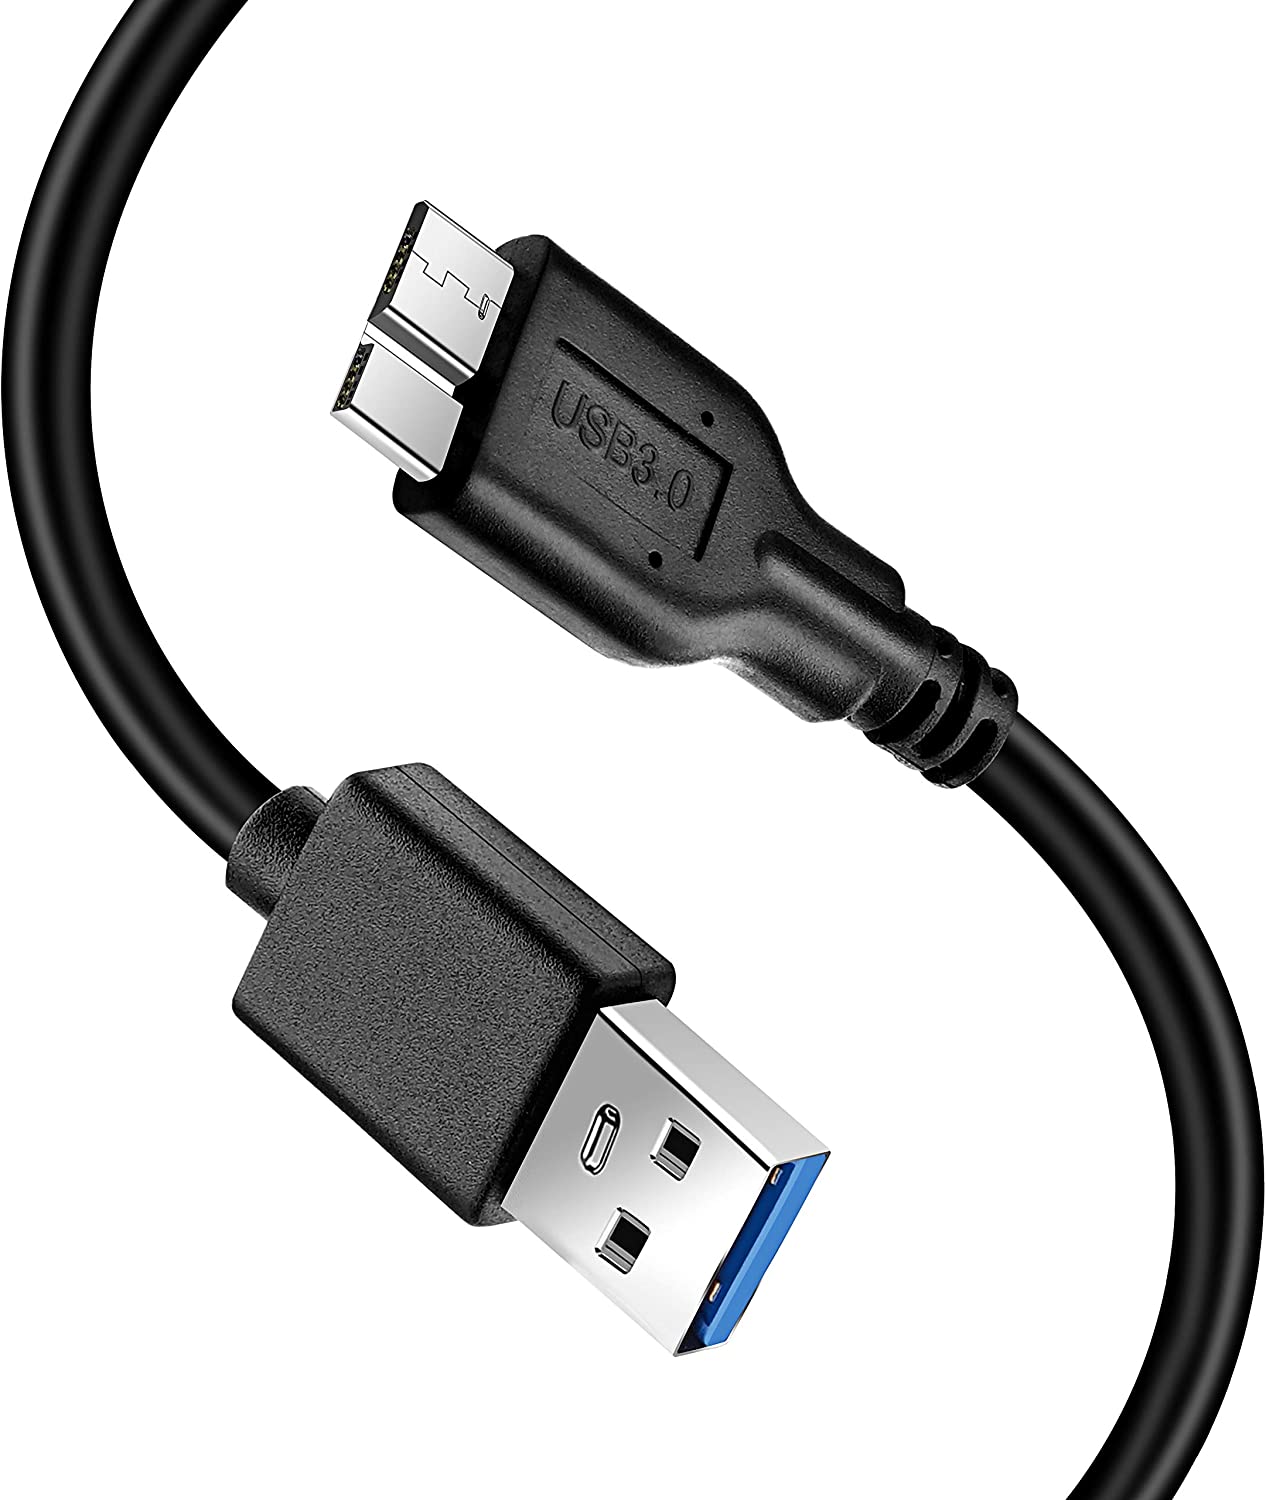 Micro B Cable, USB 3.0 A Male to Micro USB 3.0 Sync Cord,Data Wire for Toshiba,Seagate,Samsung,WD, My - image 1 of 4